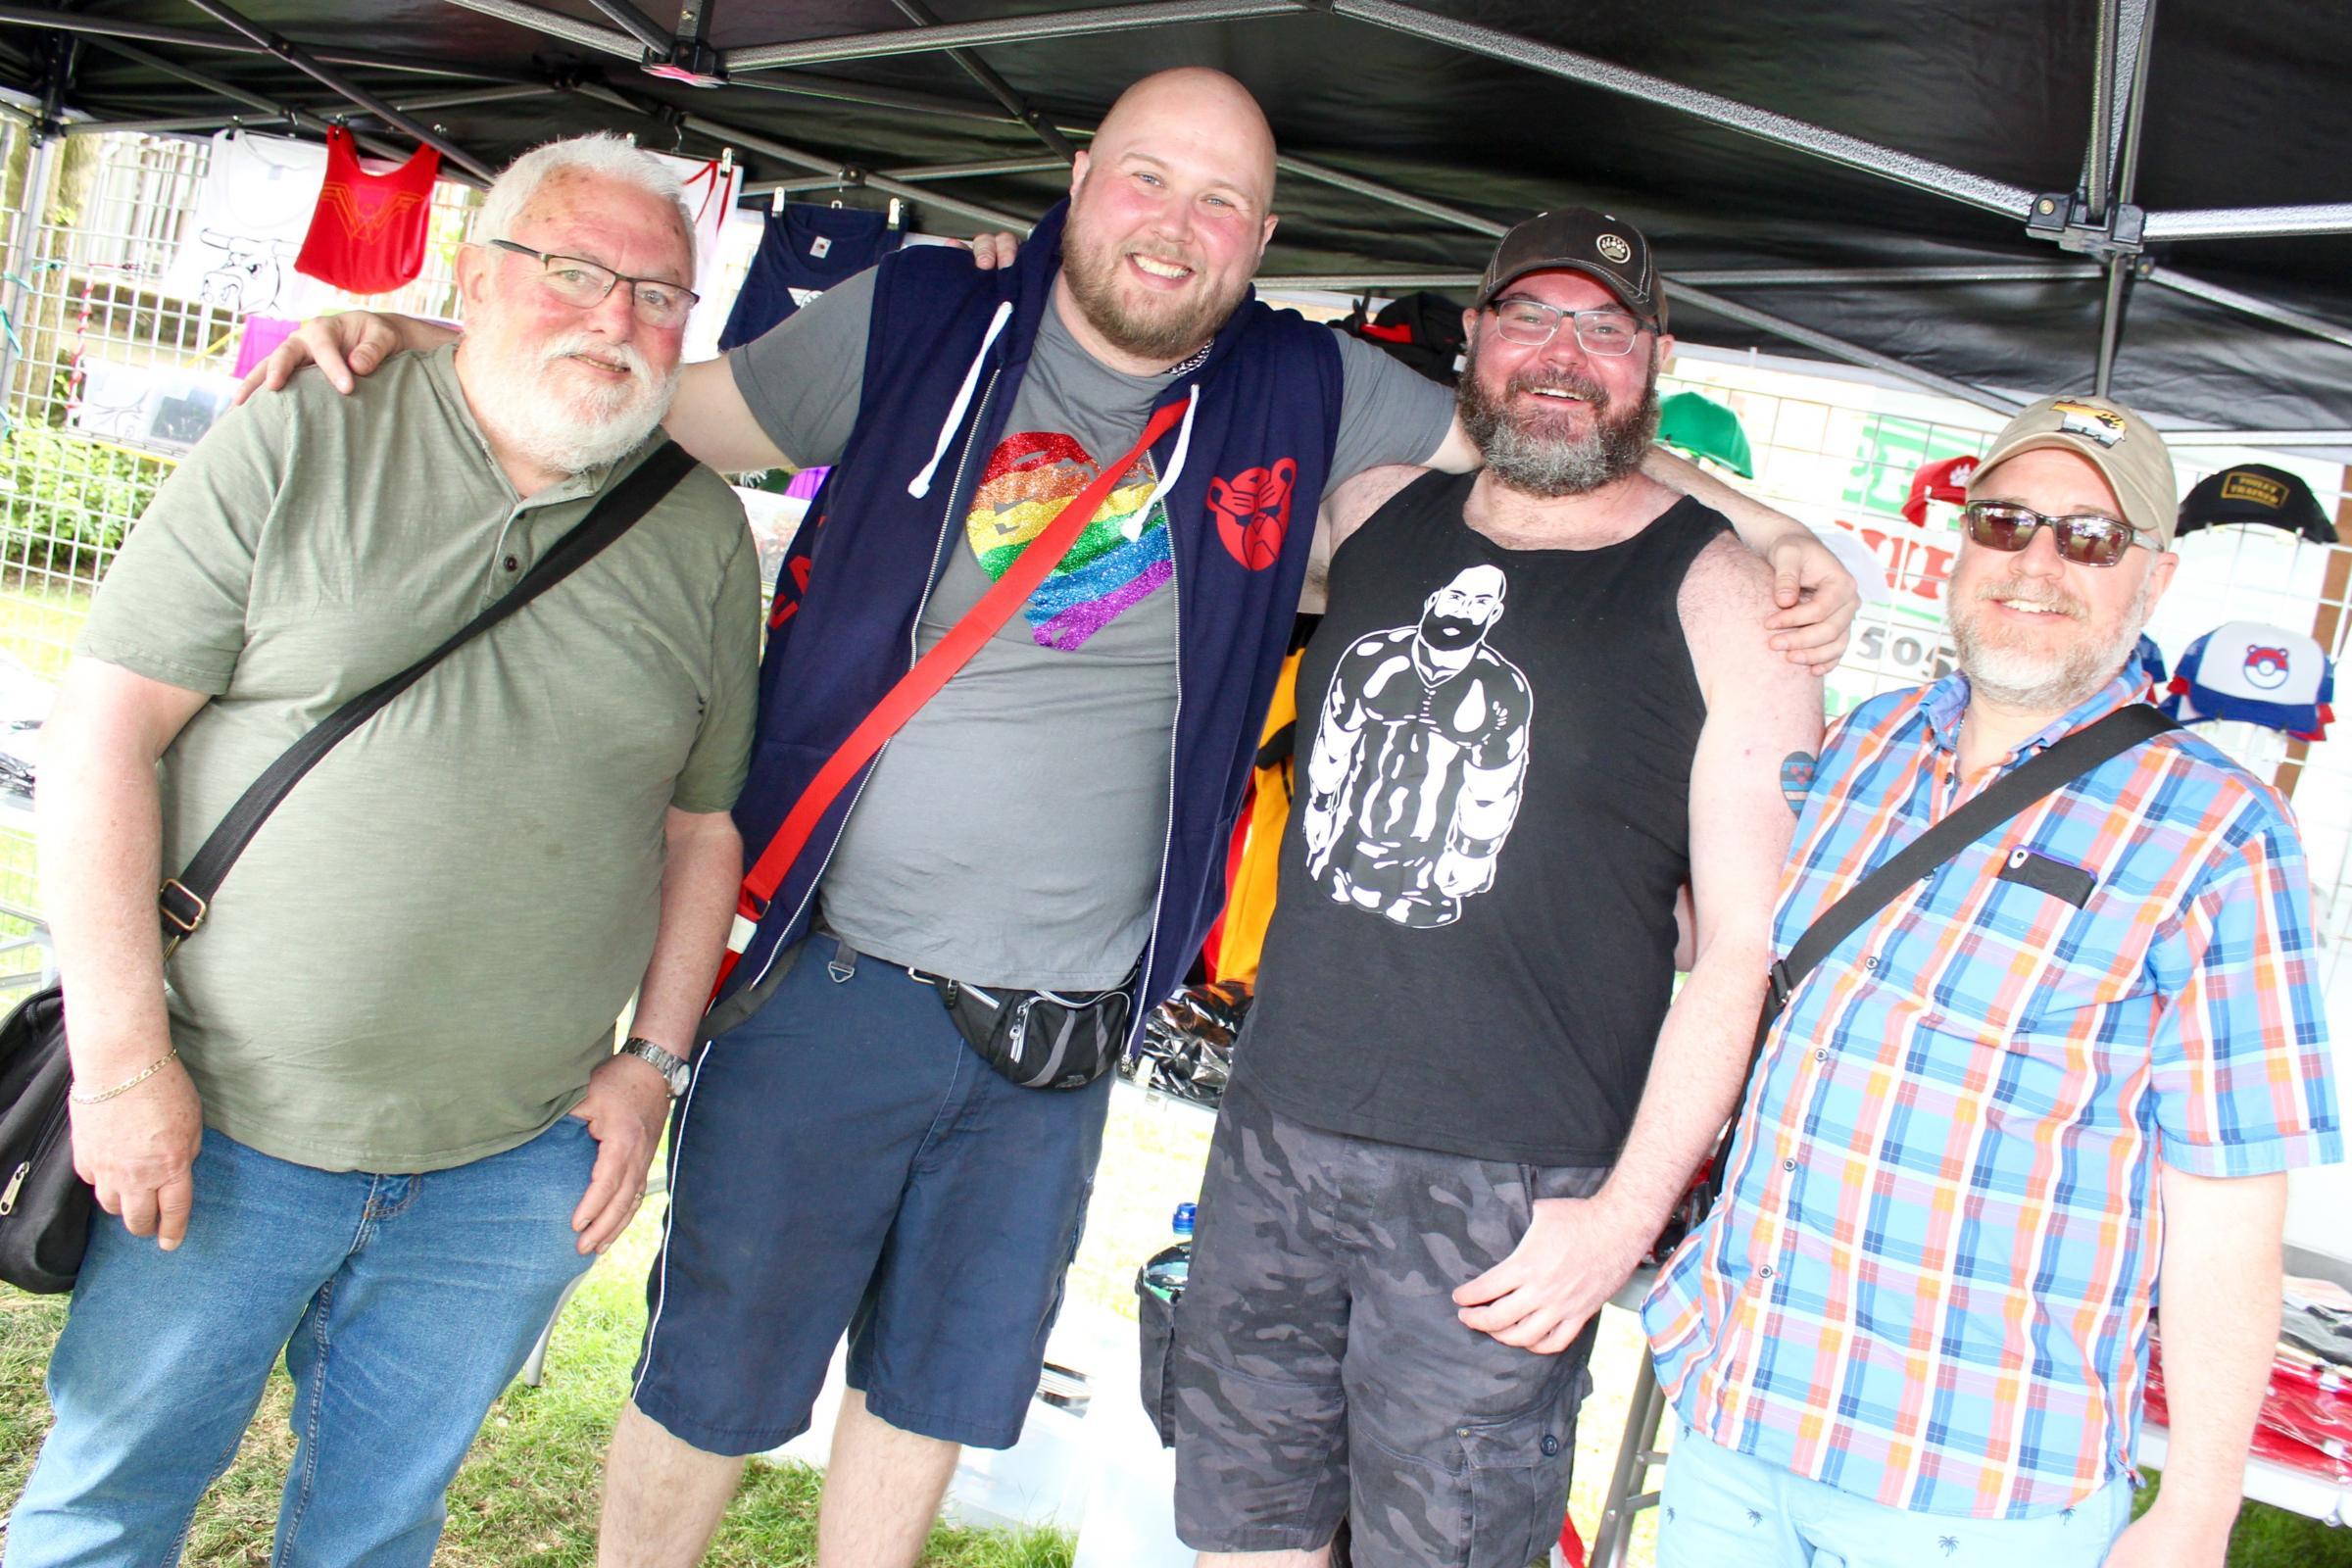 Brighton Bear Weekend is returning to the citys LGBT calendar this July 2021